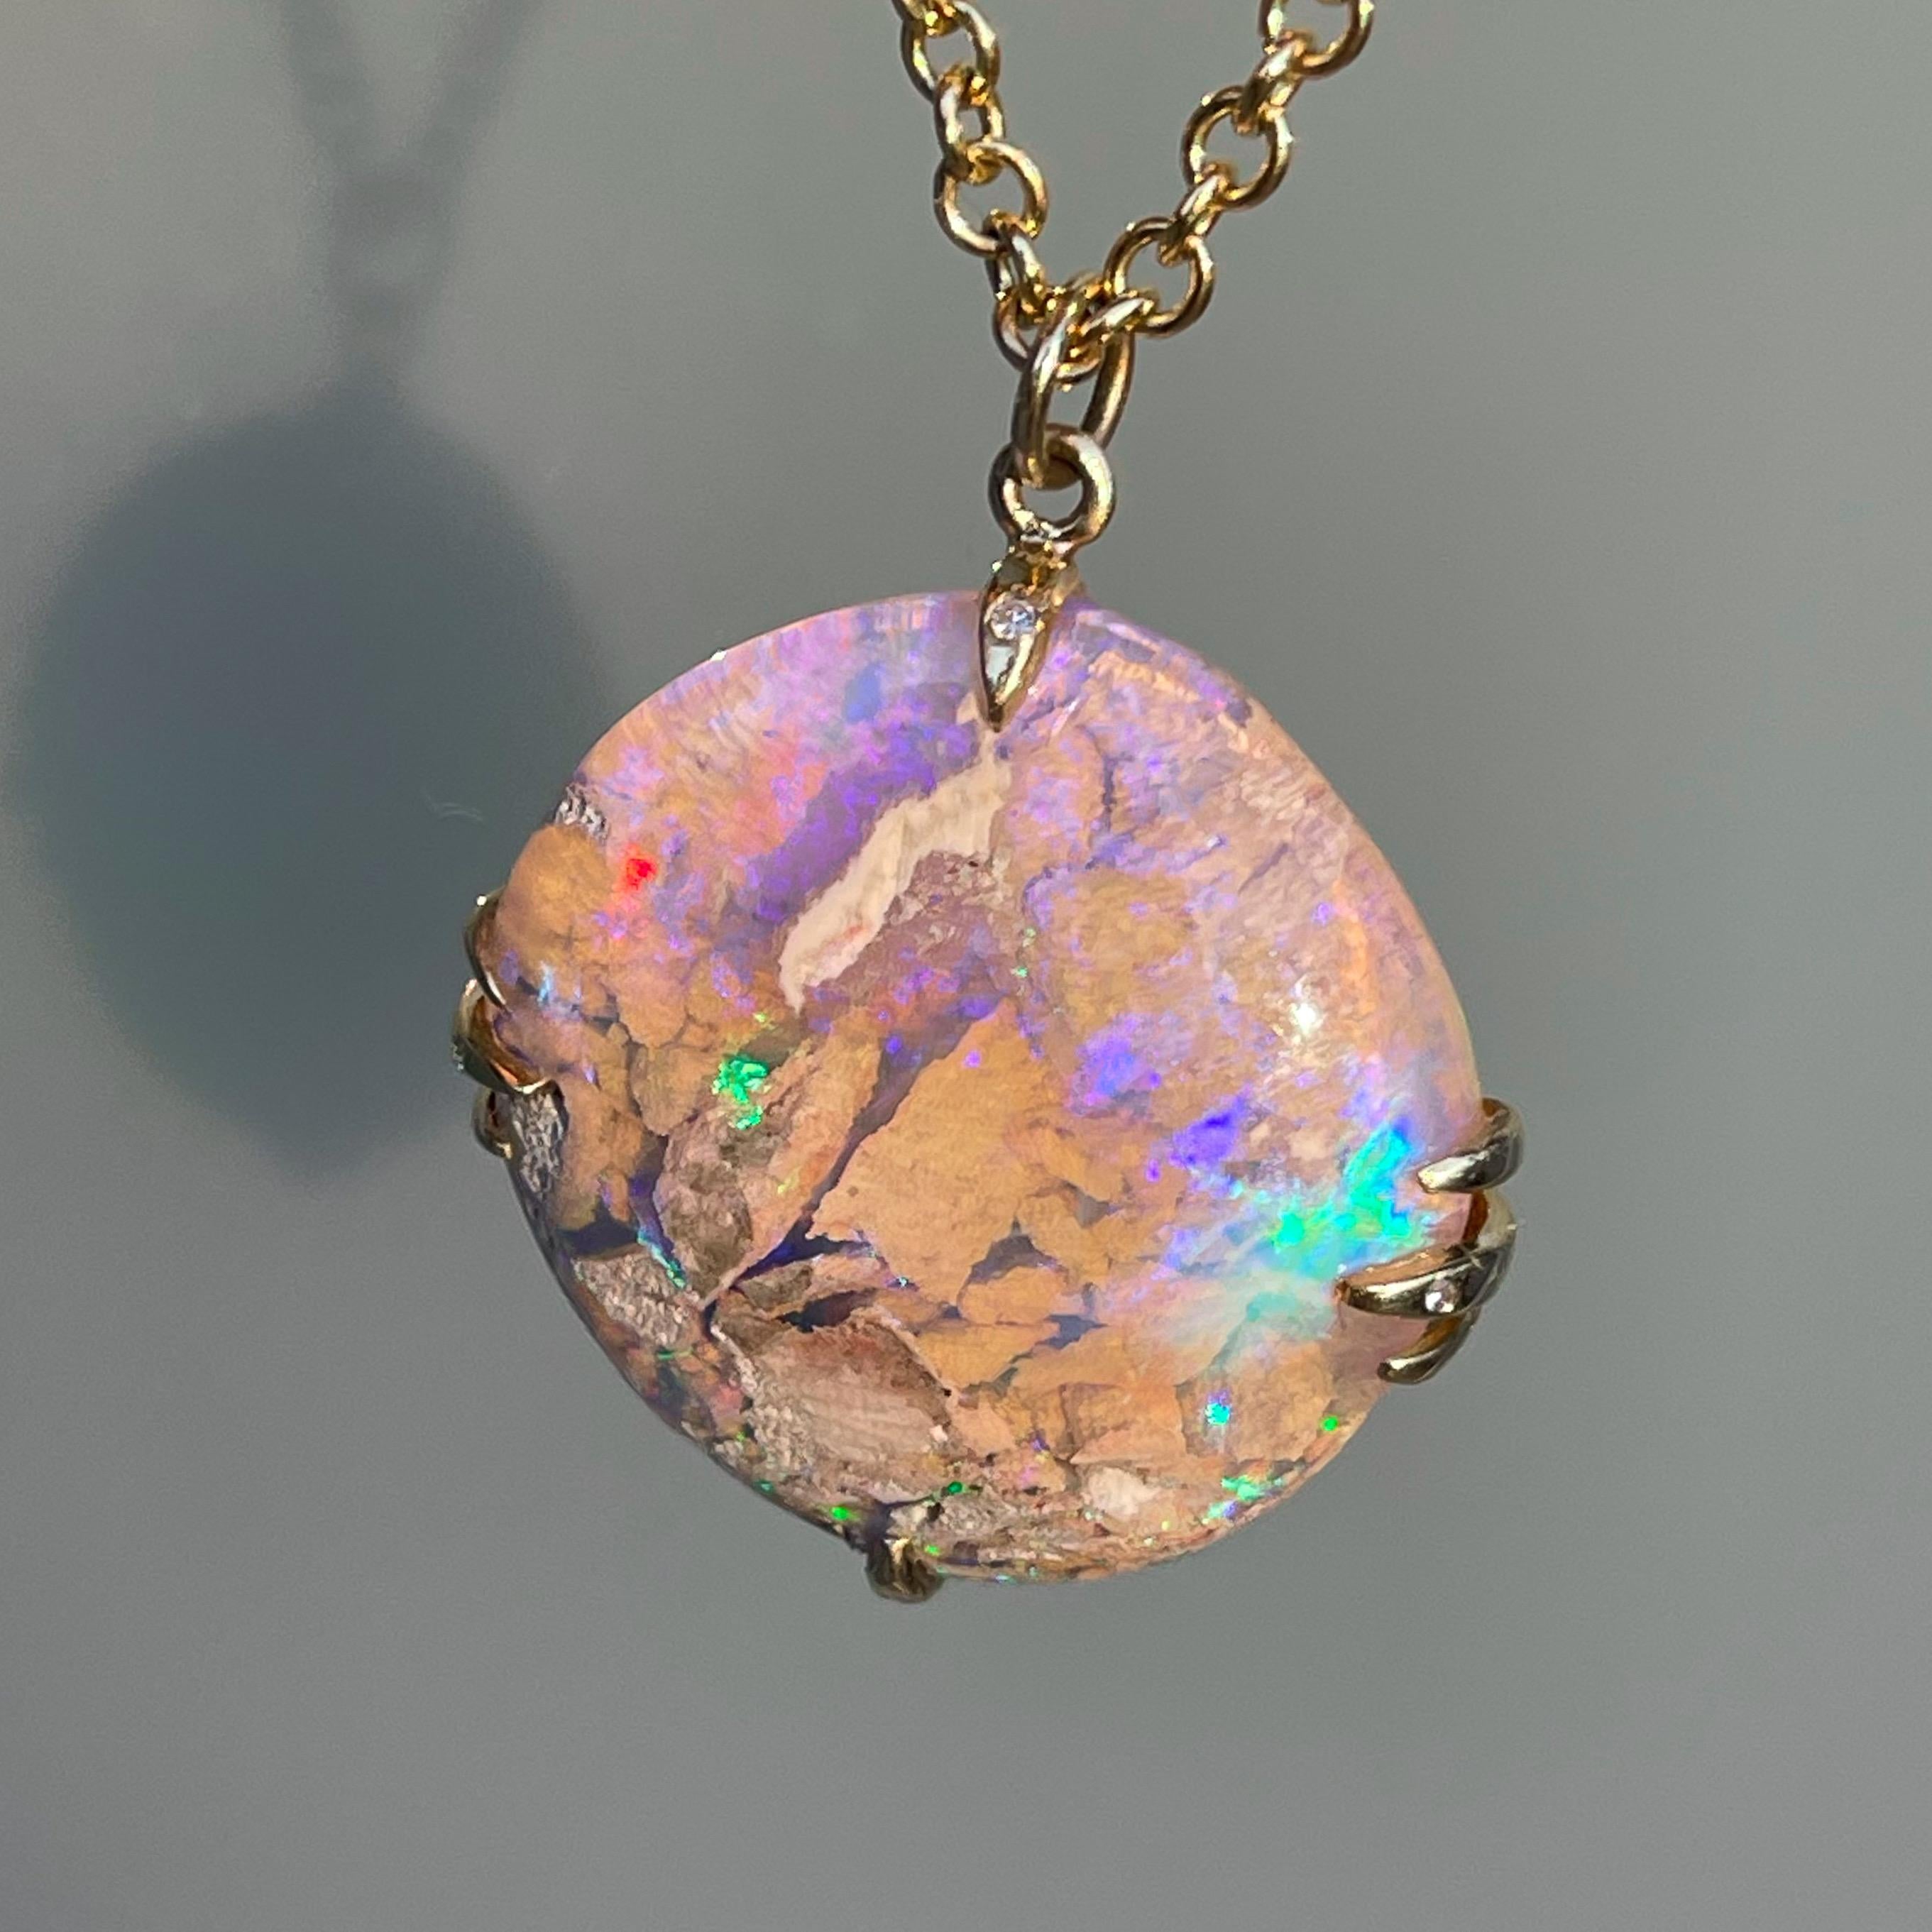 NIXIN Jewelry A Walk on the Moon Australian Opal Necklace in Gold with Diamonds 3